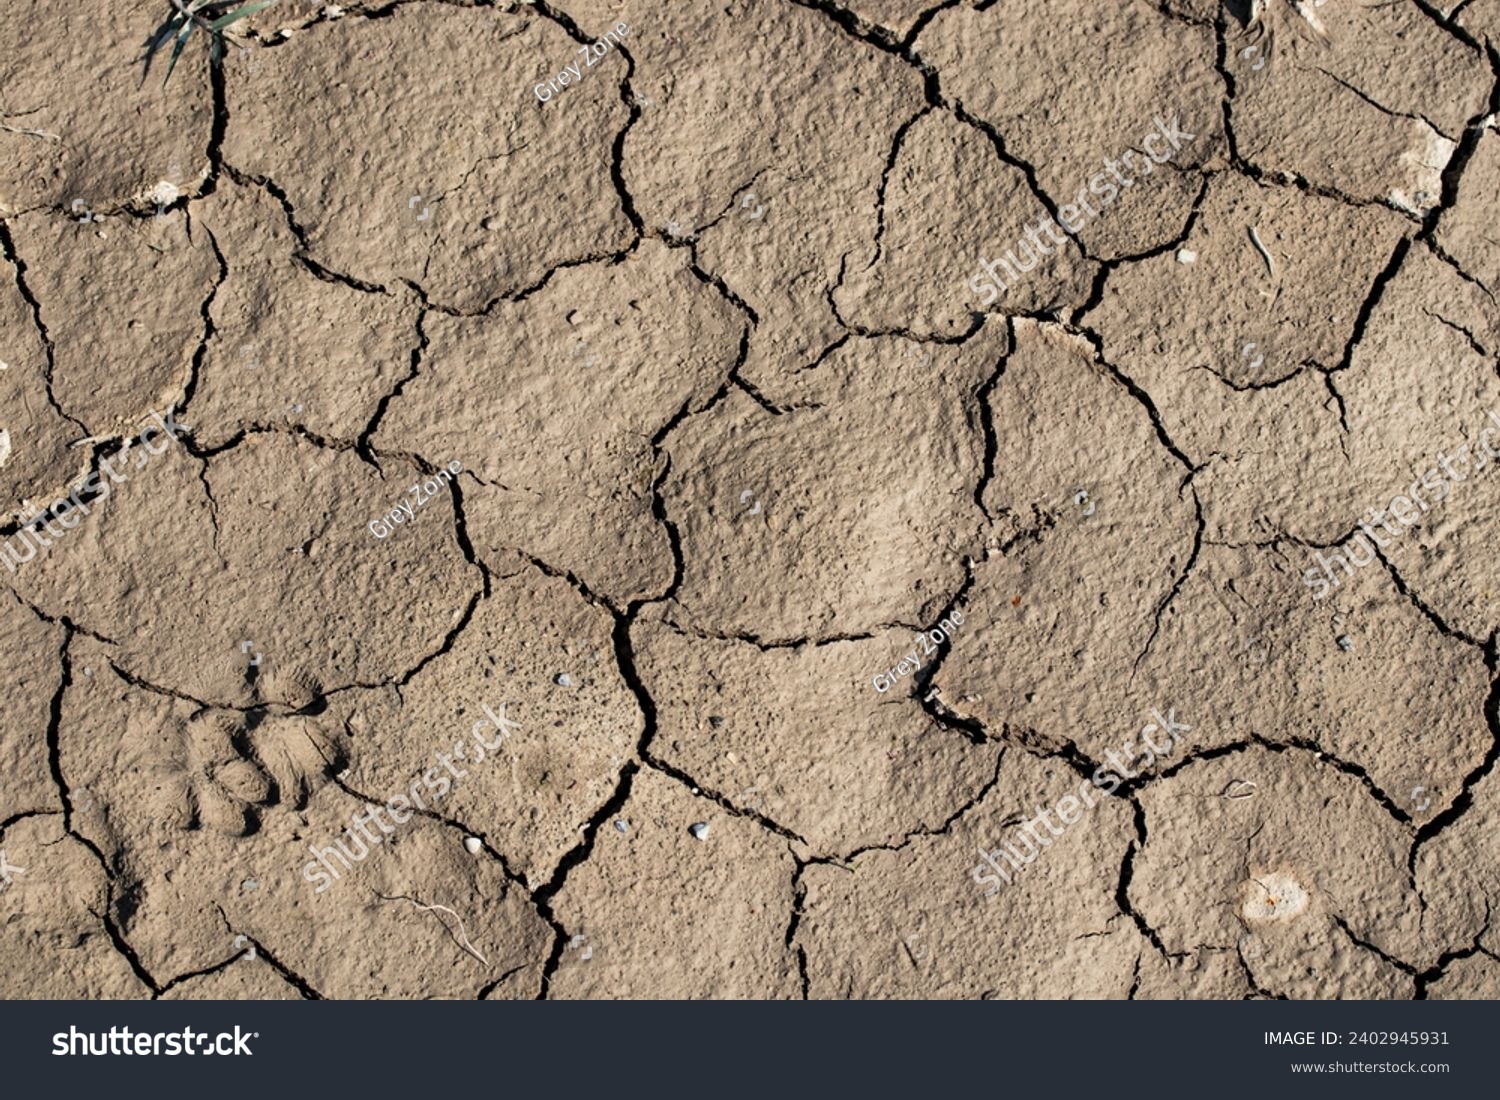 Barren Beauty: Ground Texture with Intricate Cracks #2402945931